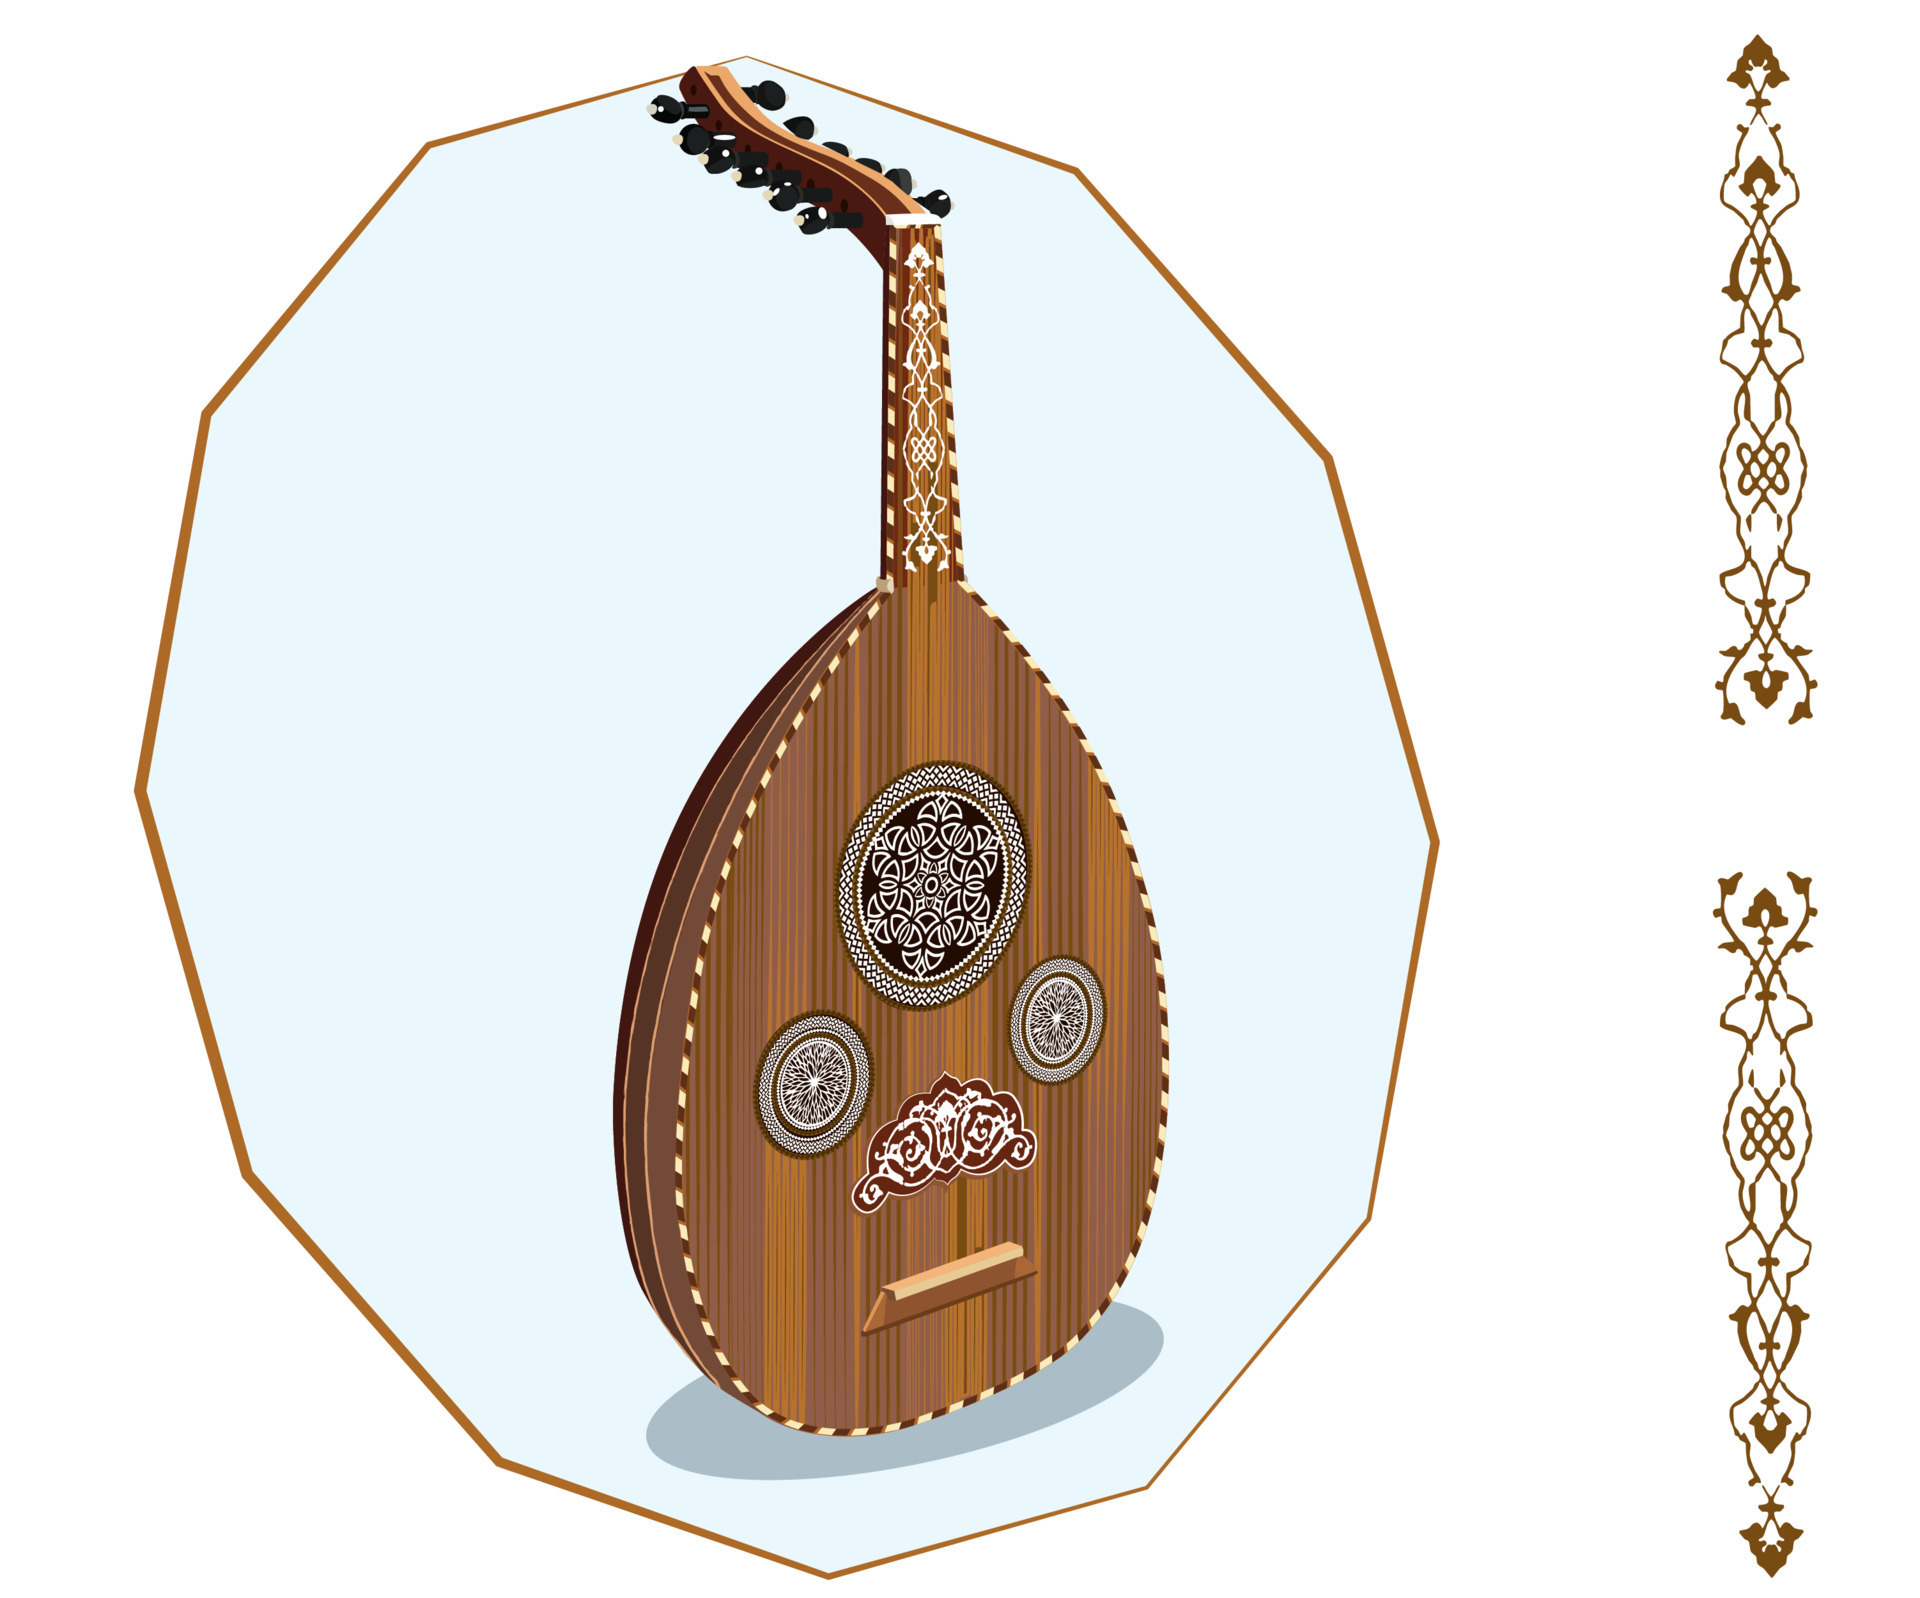 Oud icon. Middle eastern arabian music instrument